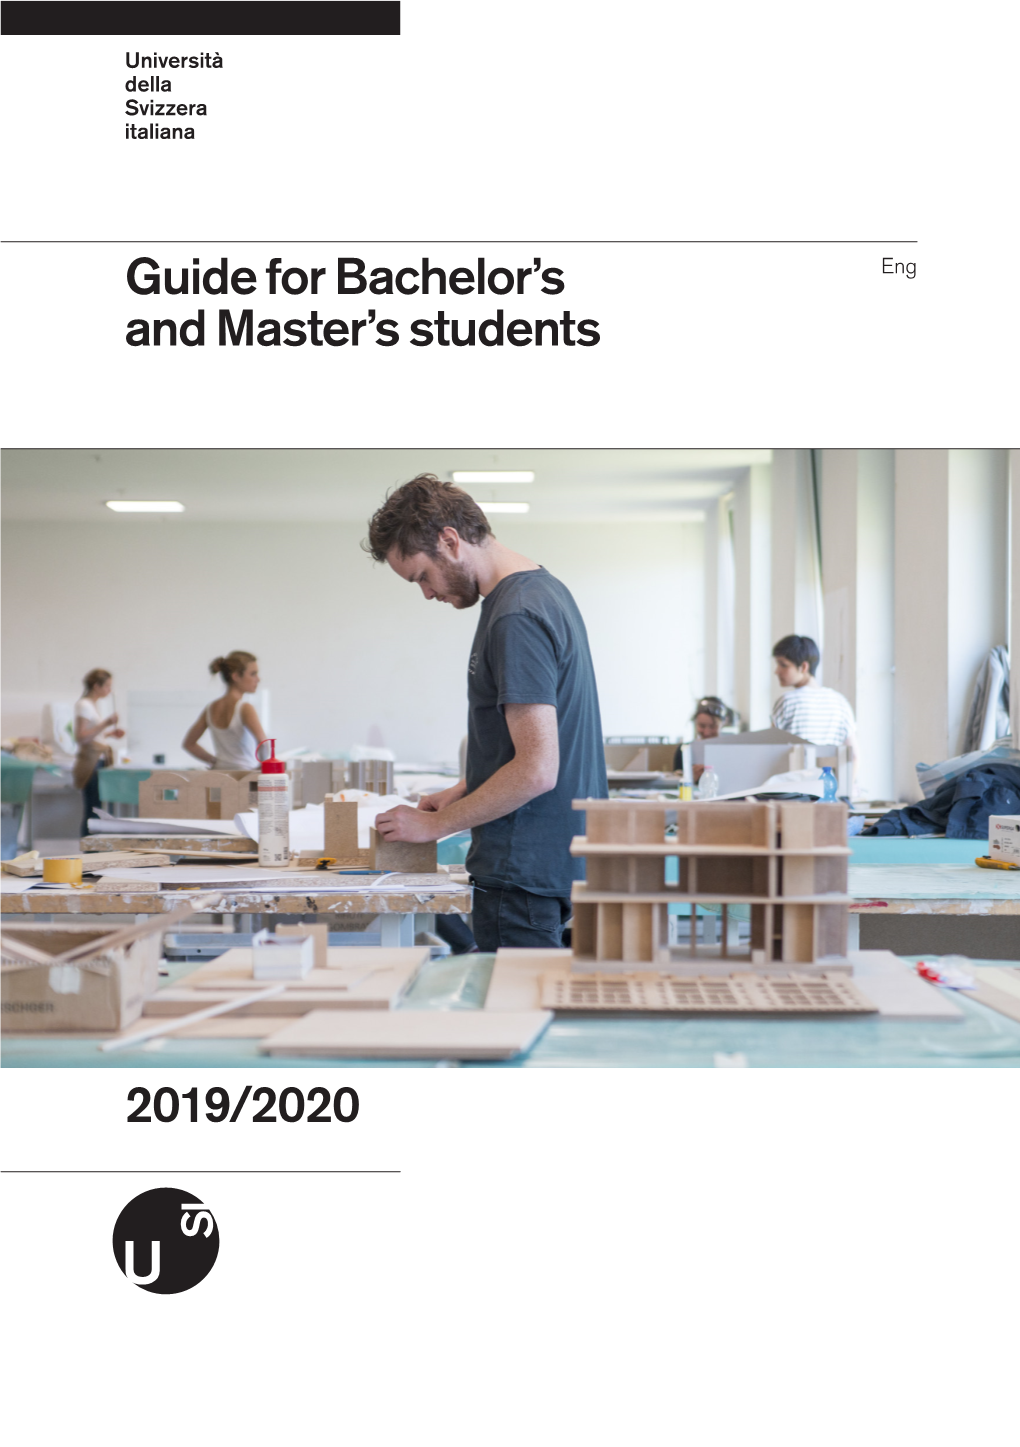 Student Guide 2019/2020 Have Been Updated on July 2019